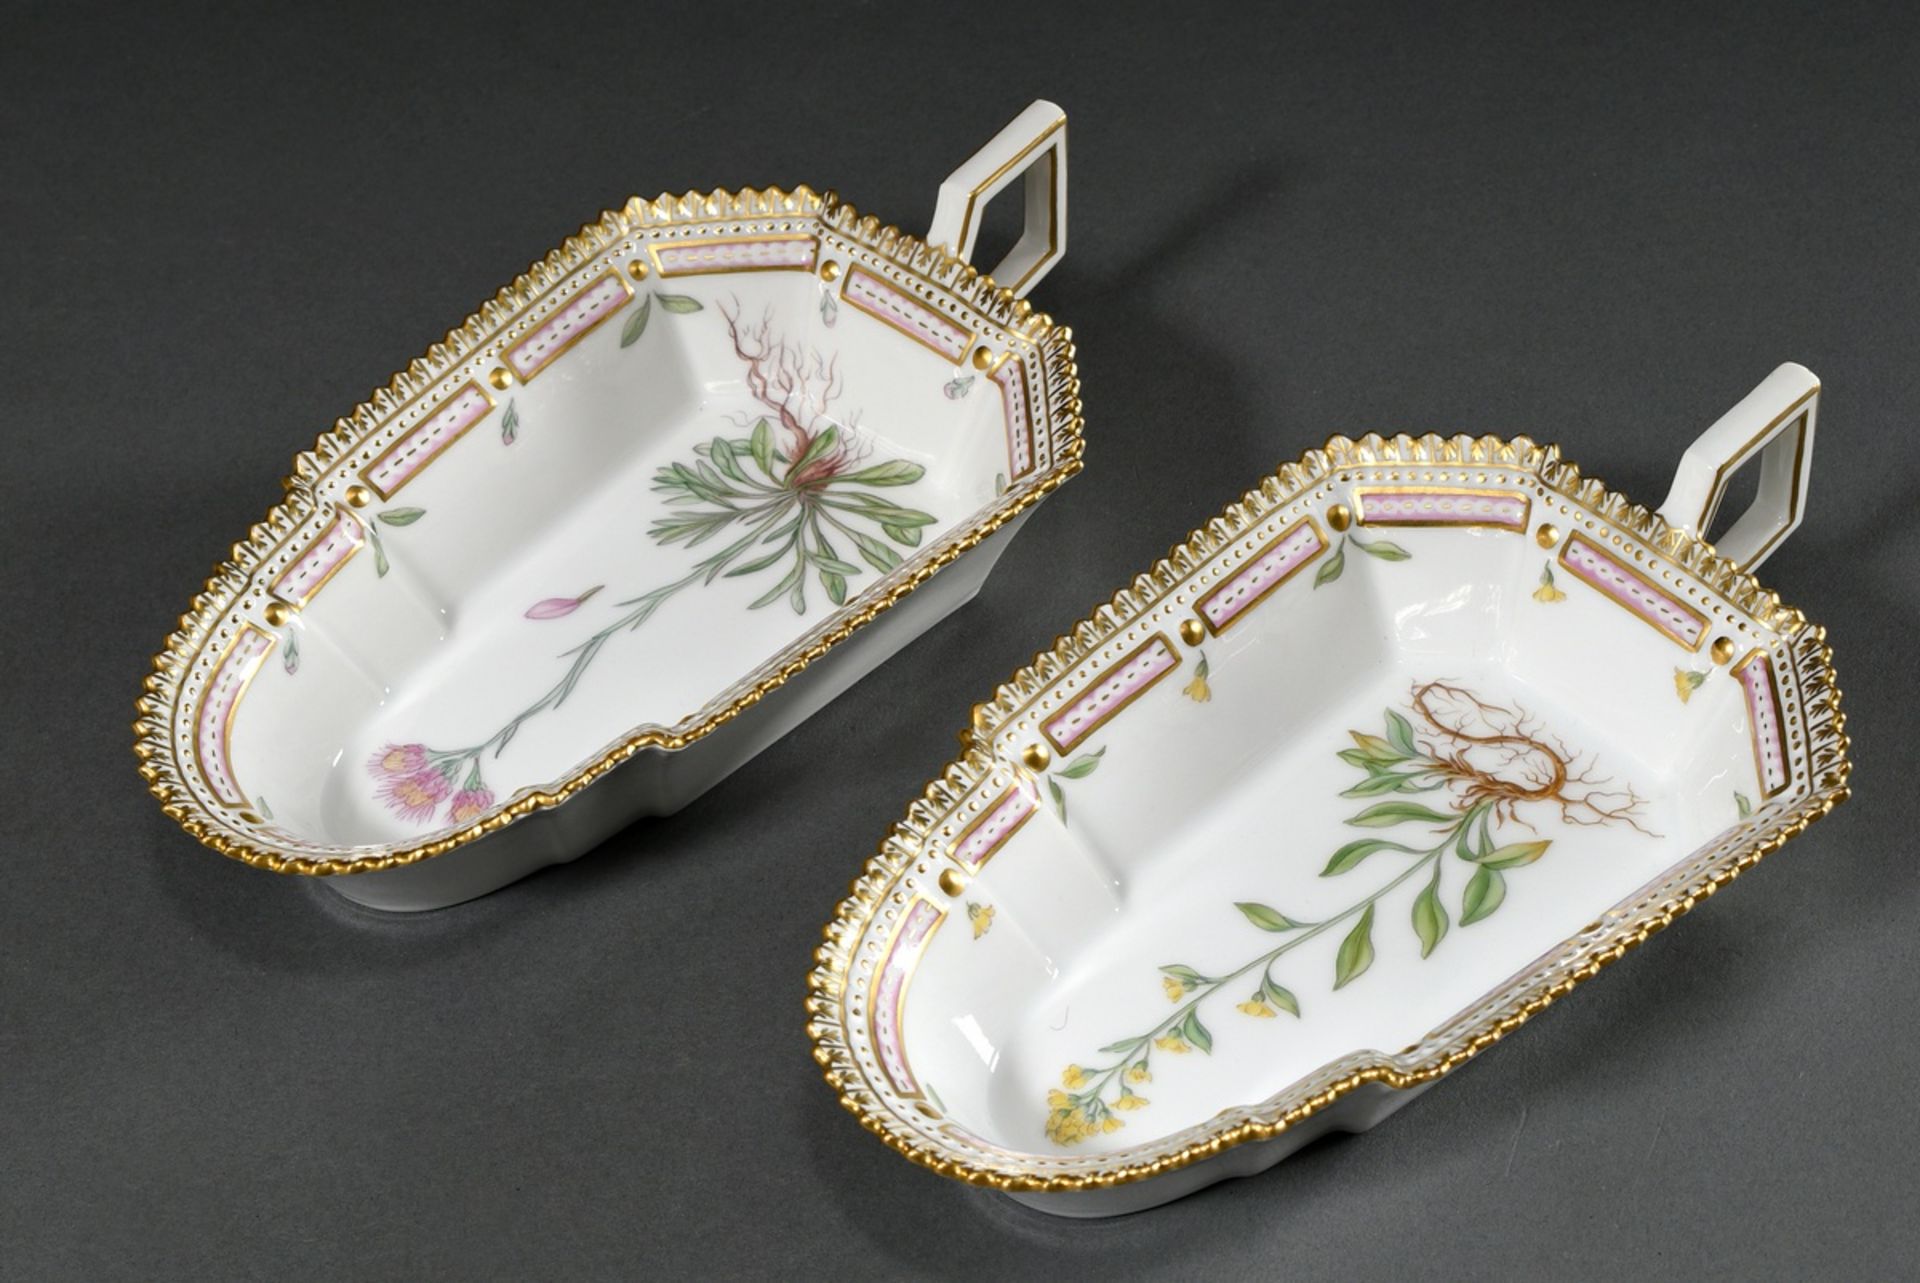 A pair of Royal Copenhagen "Flora Danica" bowls with polychrome painting and gold decorated serrate